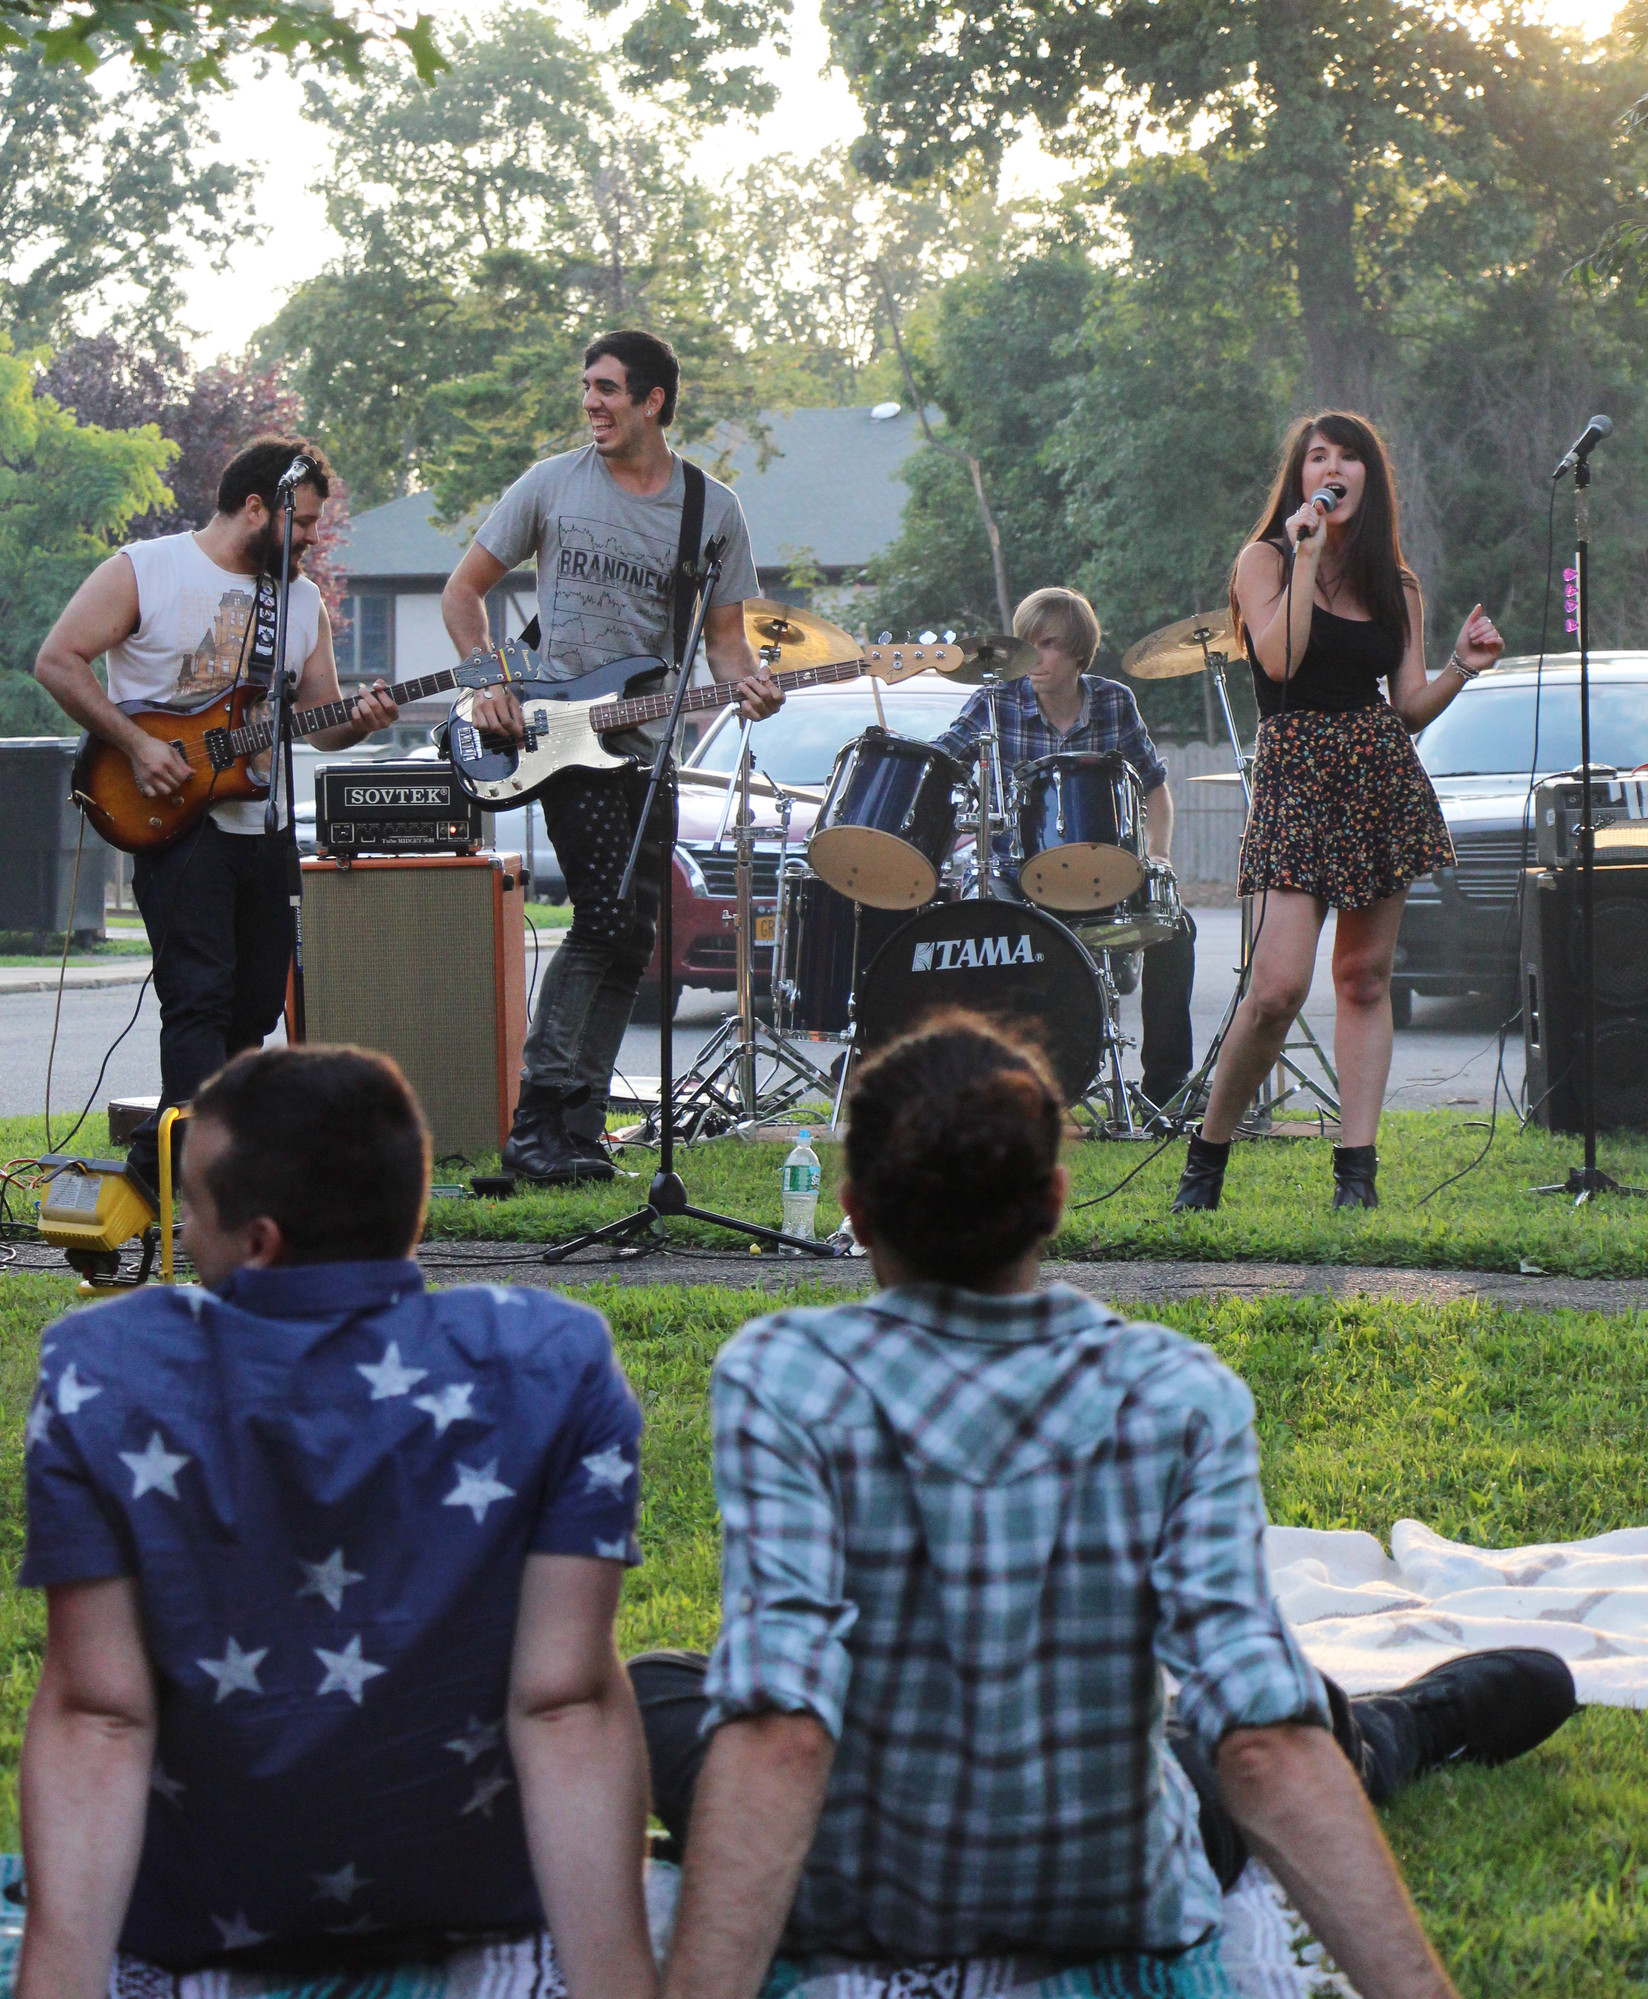 A local band Chasing April played some original rock n’ roll, and many spectators enjoyed their music.